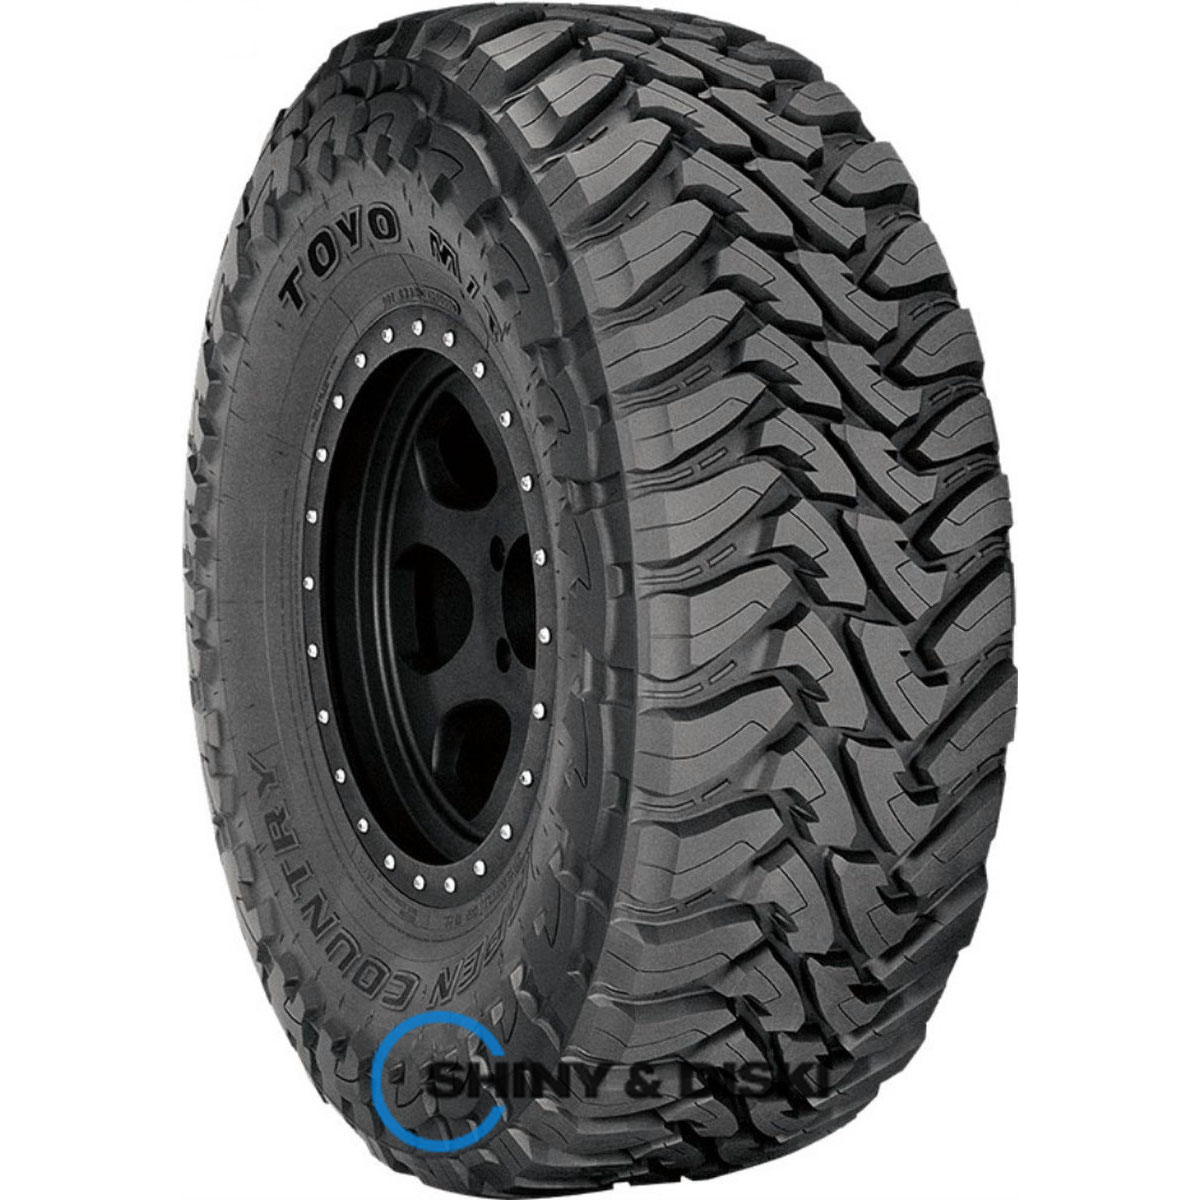 toyo open country m/t 255/85 r16 119/116p